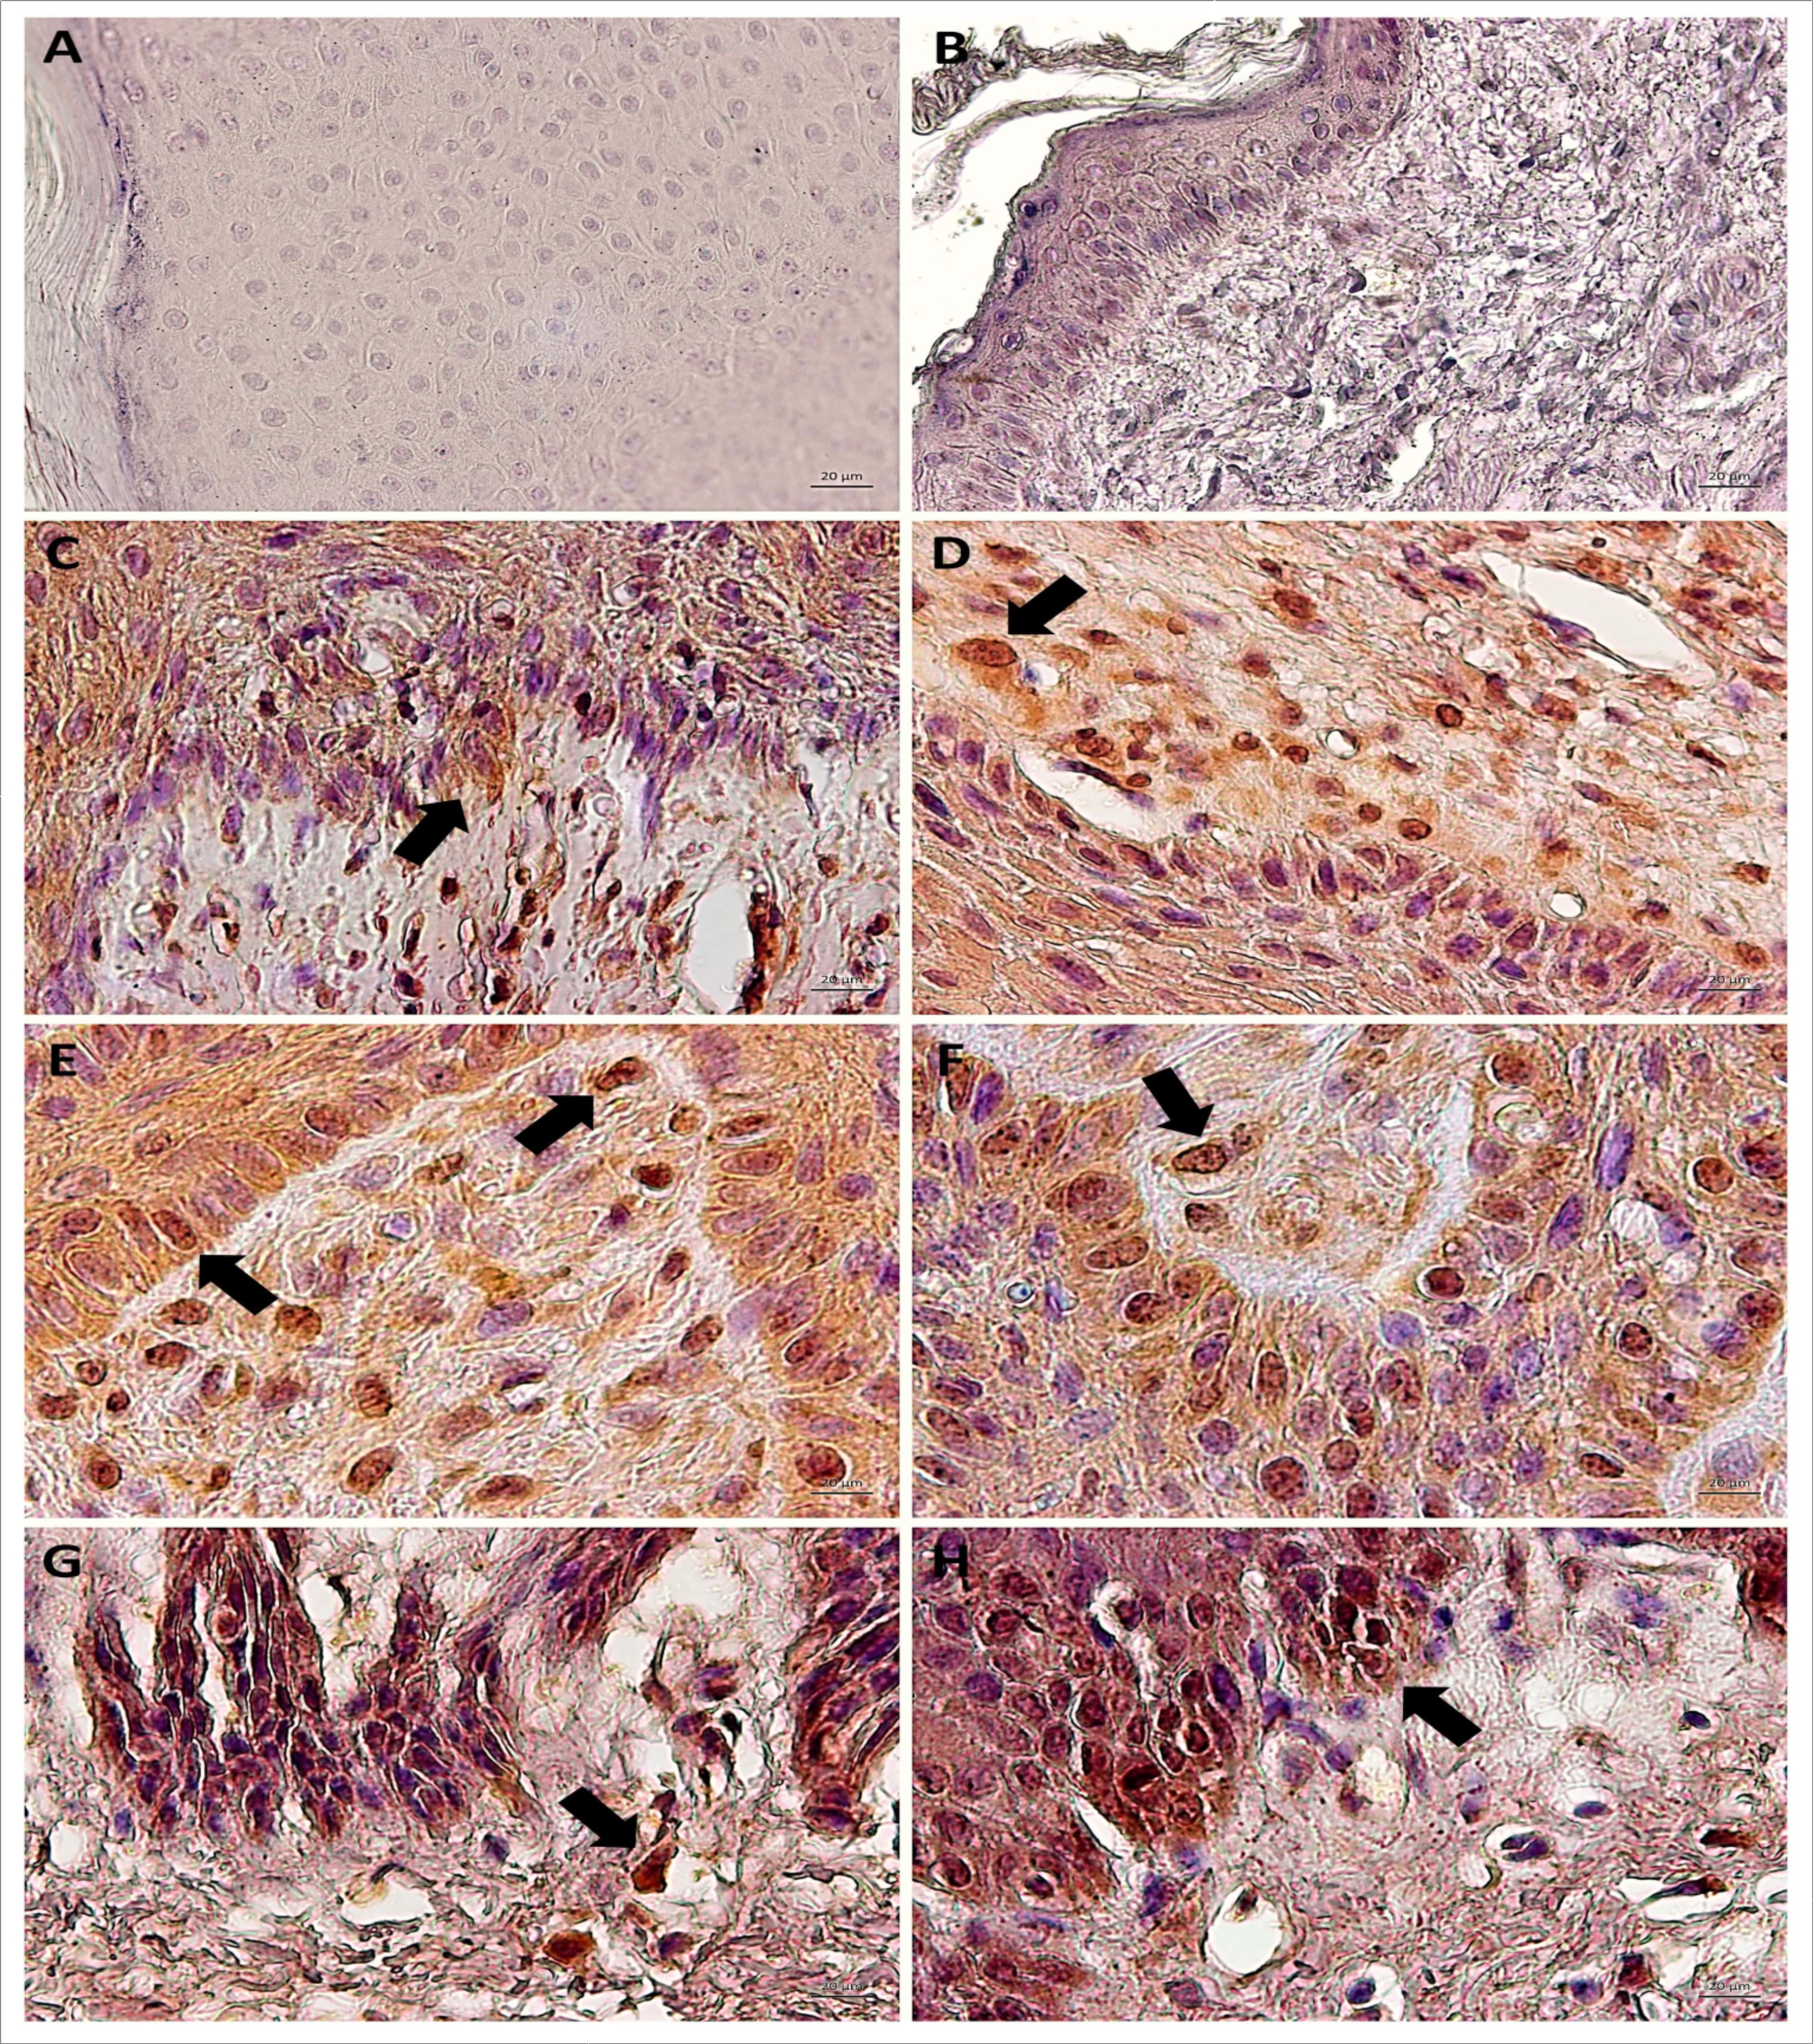  Immunodetection of STAT3 Y705 (active) showing the absence of expression in negative control  (A, cutaneous papilloma incubated exclusively with secondary antibody) and BPV-free normal skin (B). Results show the aberrant nuclear immunodetection of STAT3 Y705 cutaneous papilloma (C and D, papilloma 01),  fibropapilloma (E and F - papilloma 02 and 03, respectively) and esophageal carcinoma (G and H). The STAT3 Y705 expression was verified in keratinocyte-like cells present into the dermis. Images obtained using objectives of 10X (A, B, C and G) and 20X (D, E, F and H).